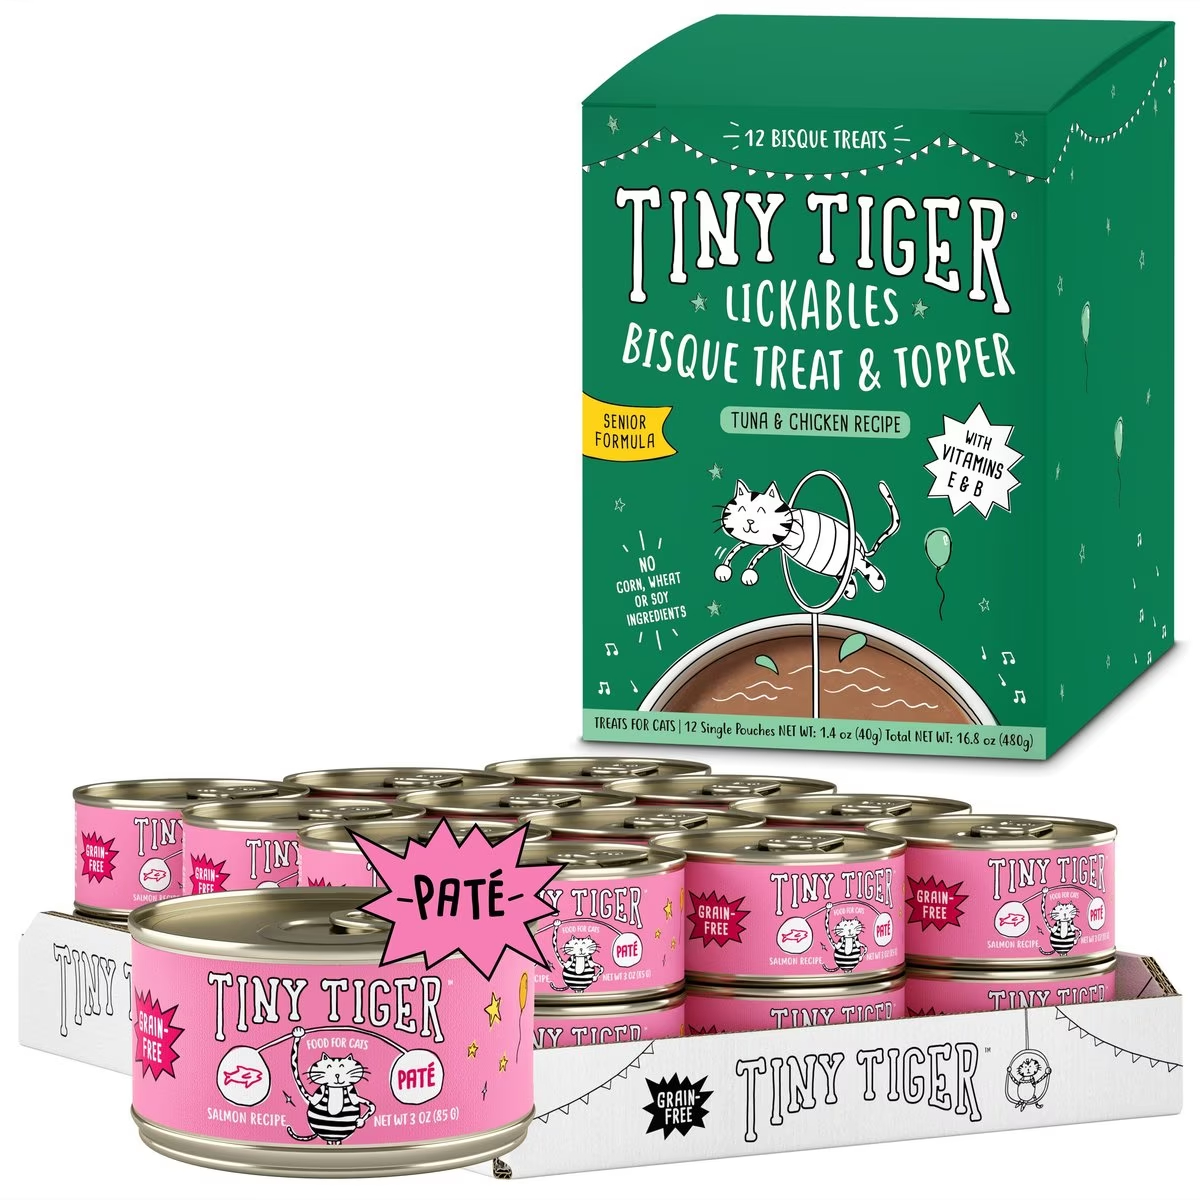 Tiny Tiger Pate Salmon Canned Food + Lickables